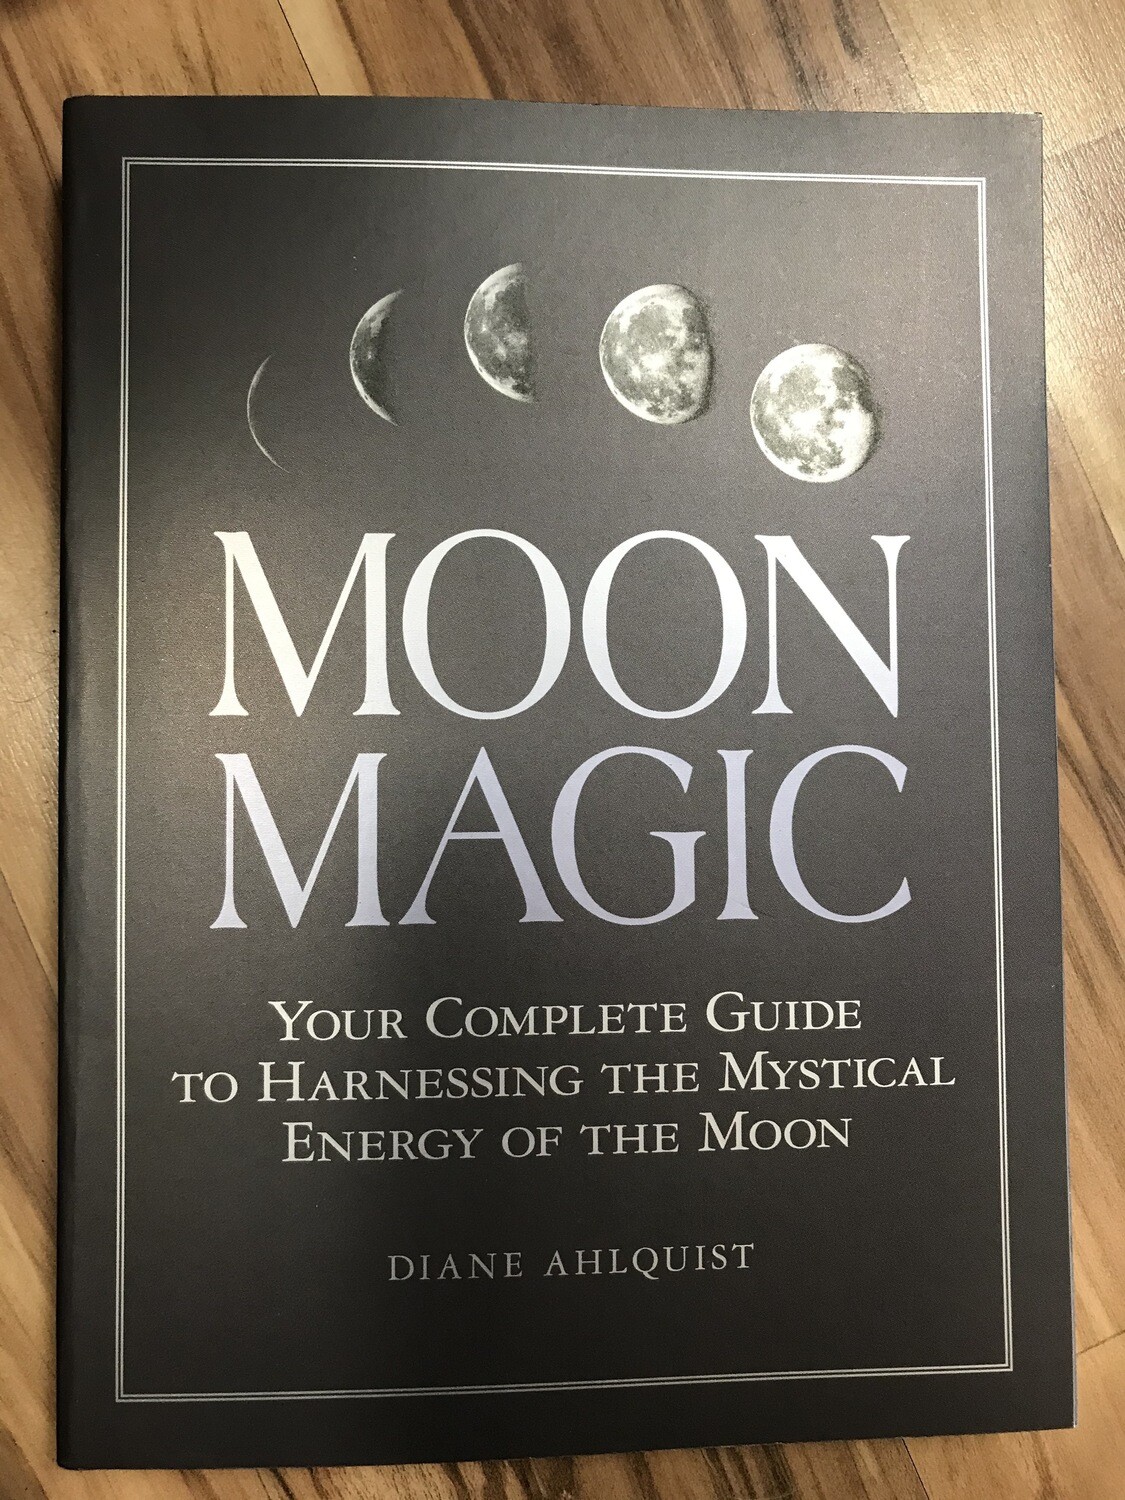 Moon Magic - Your Complete Guide to Harnessing the Mystical Energy of the Moon